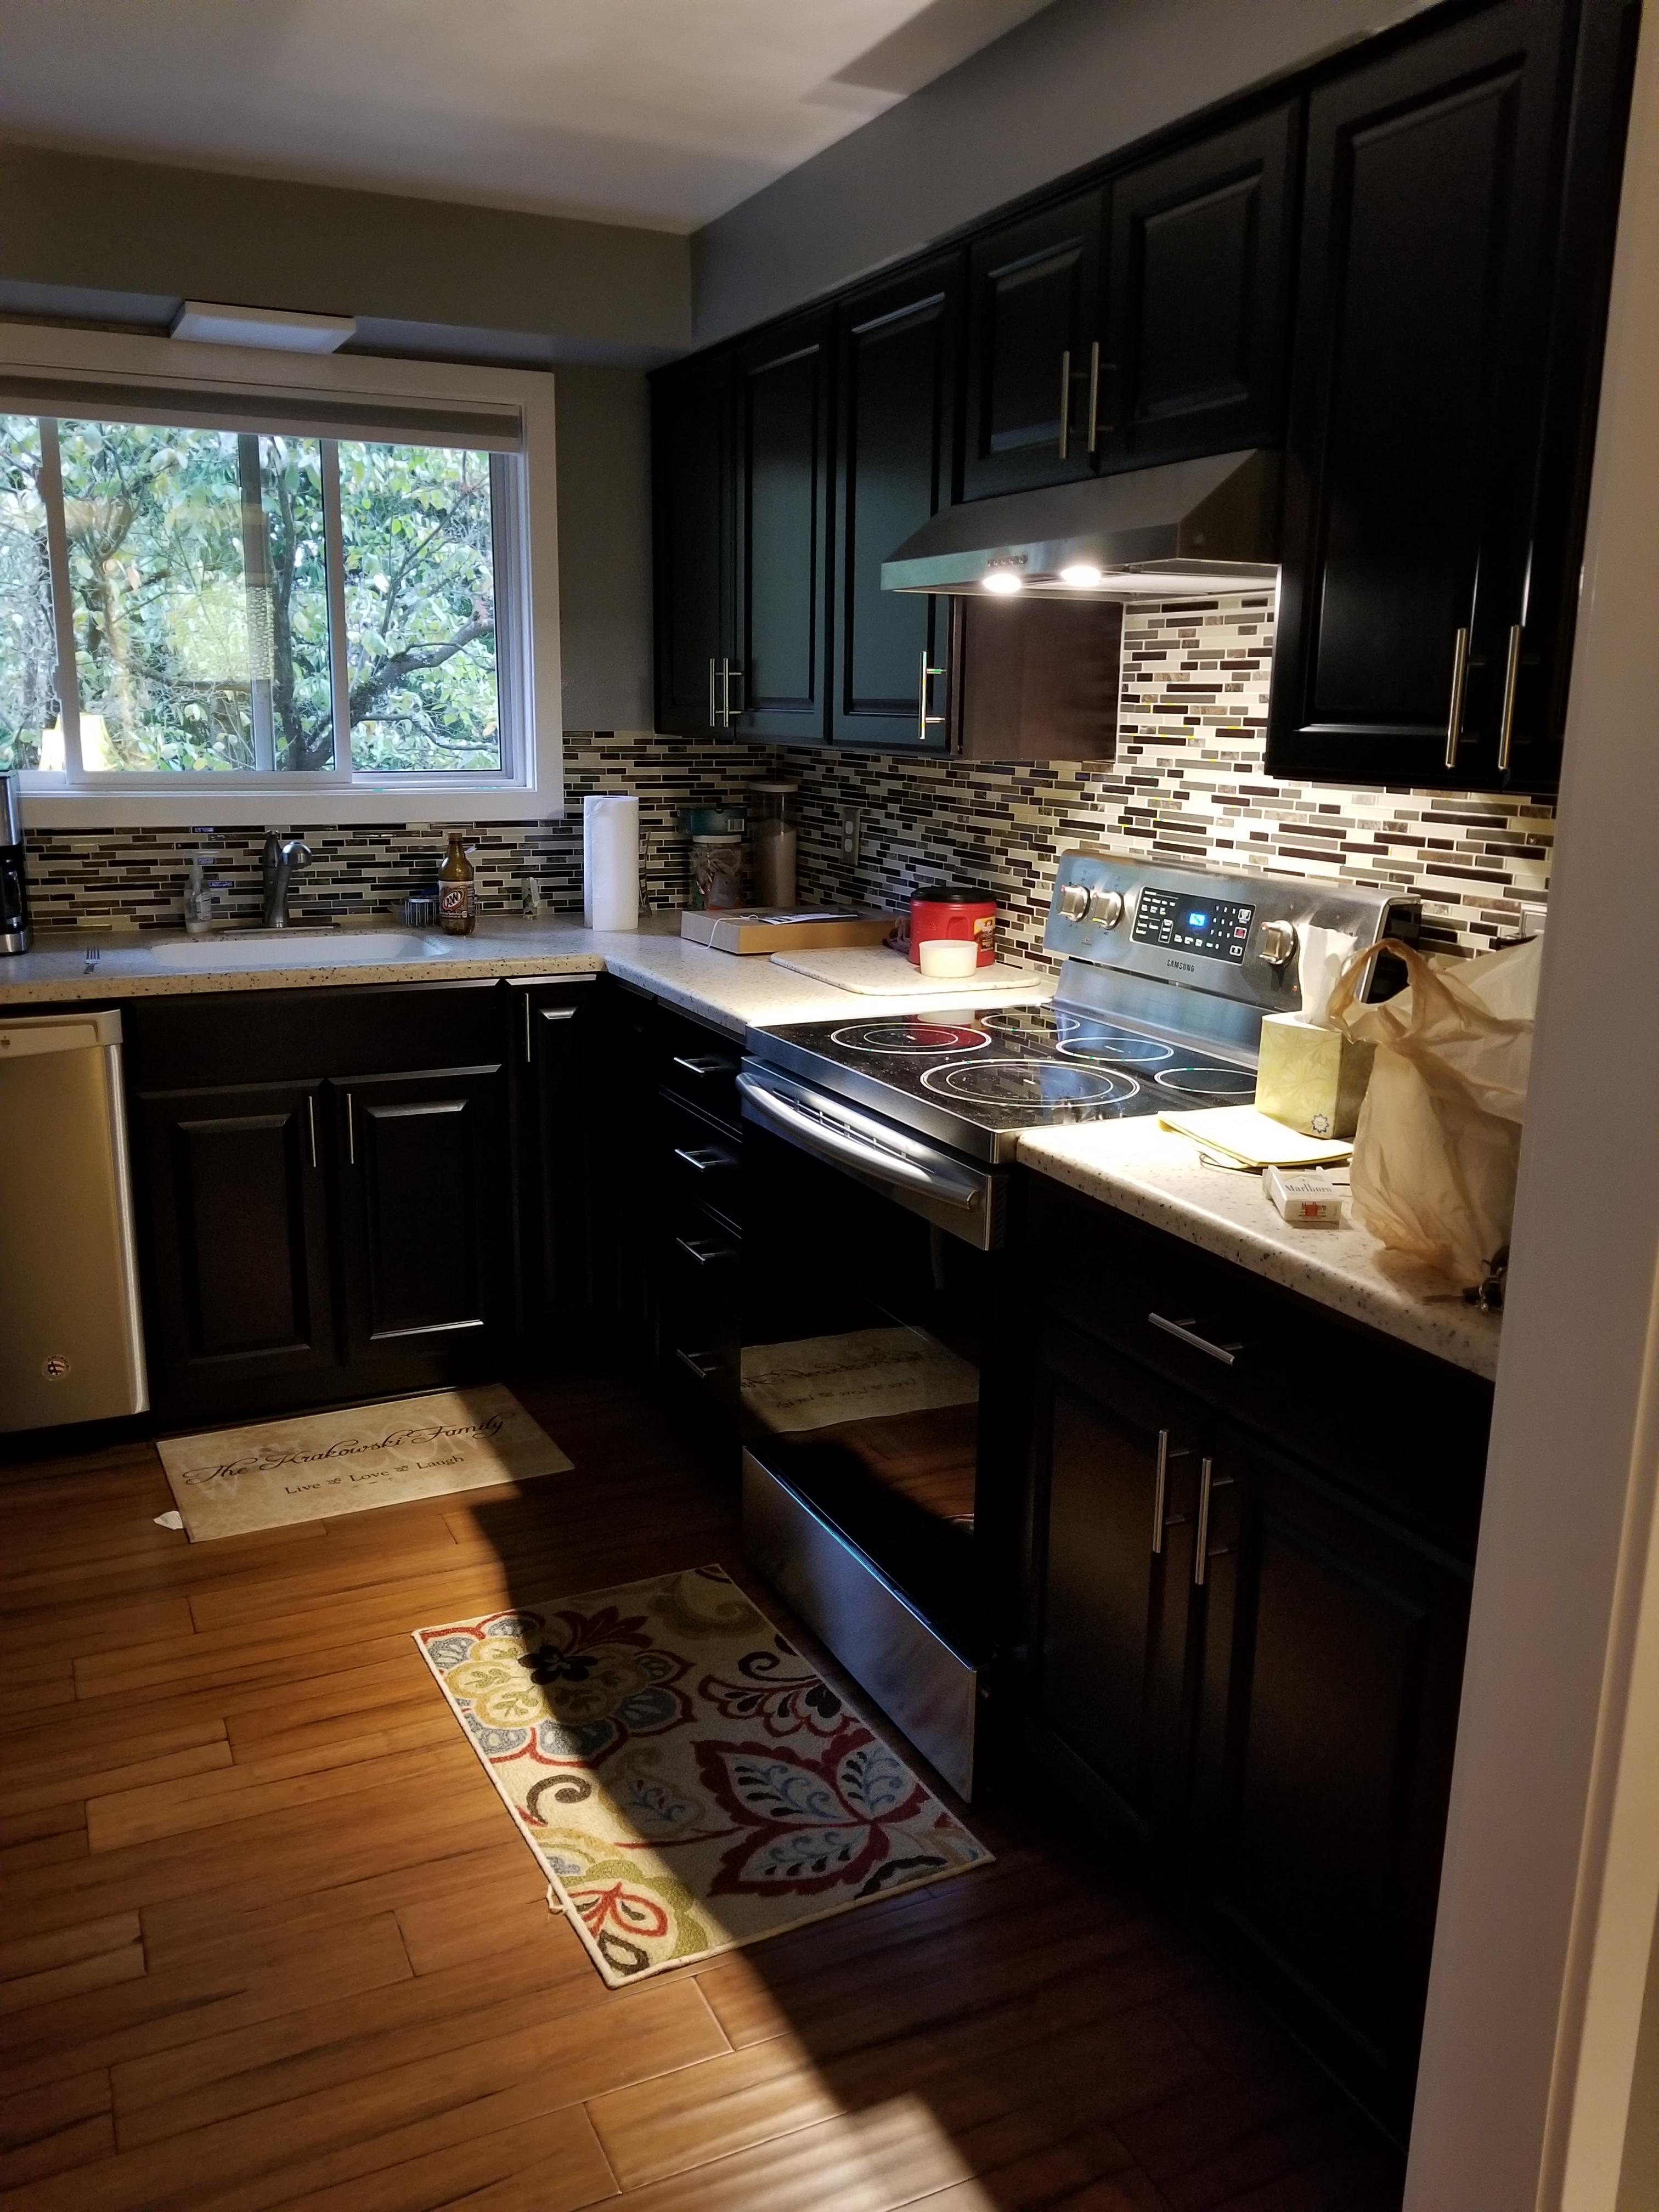 Top 10 Reviews of Lowe's Kitchen Cabinets